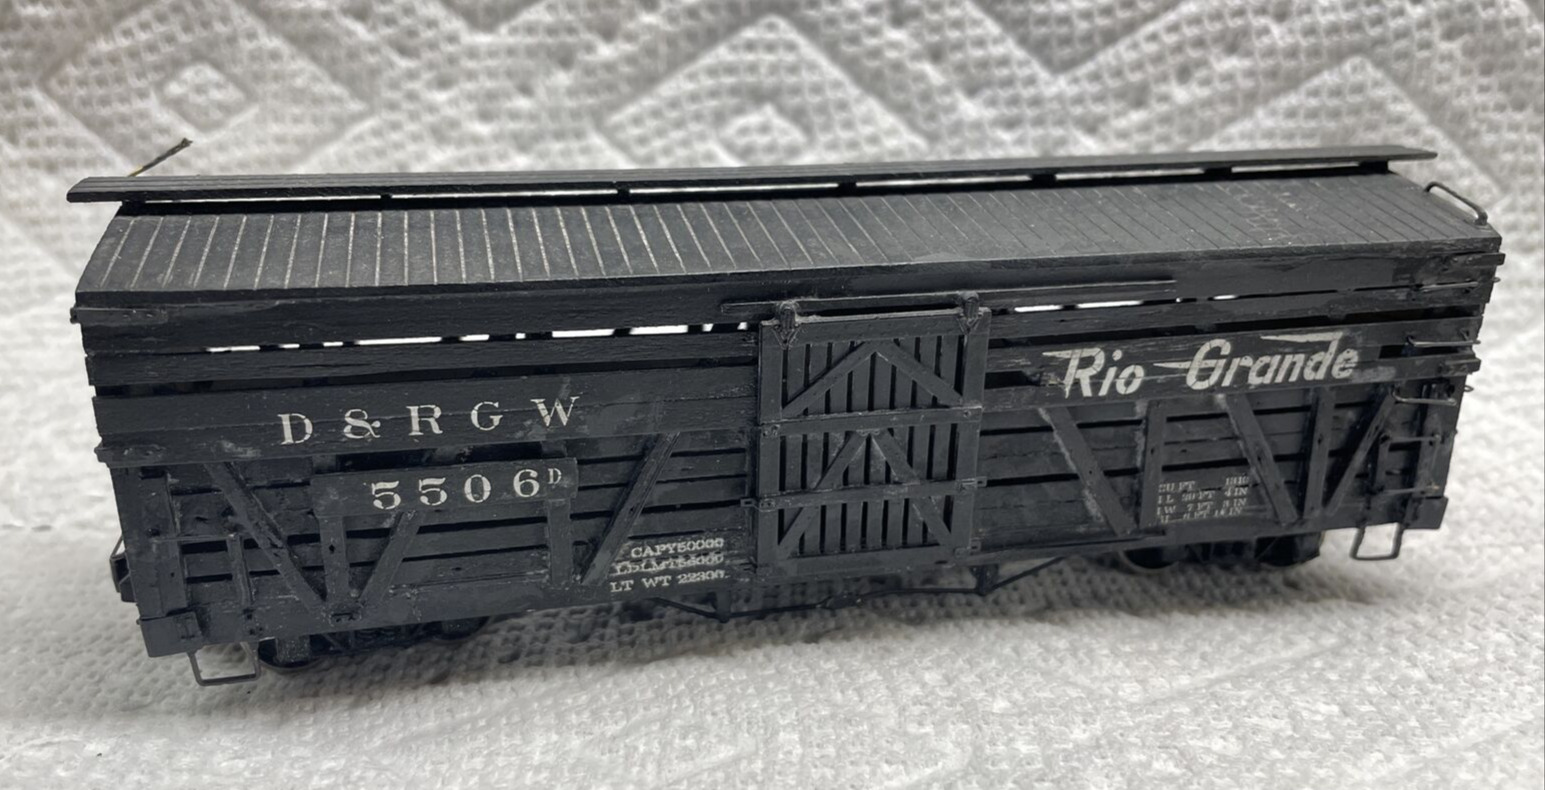 PBL or Grandt Line Sn3 RTR D&RGW Stock Car #5506 Flying Grande Weathered 1:64